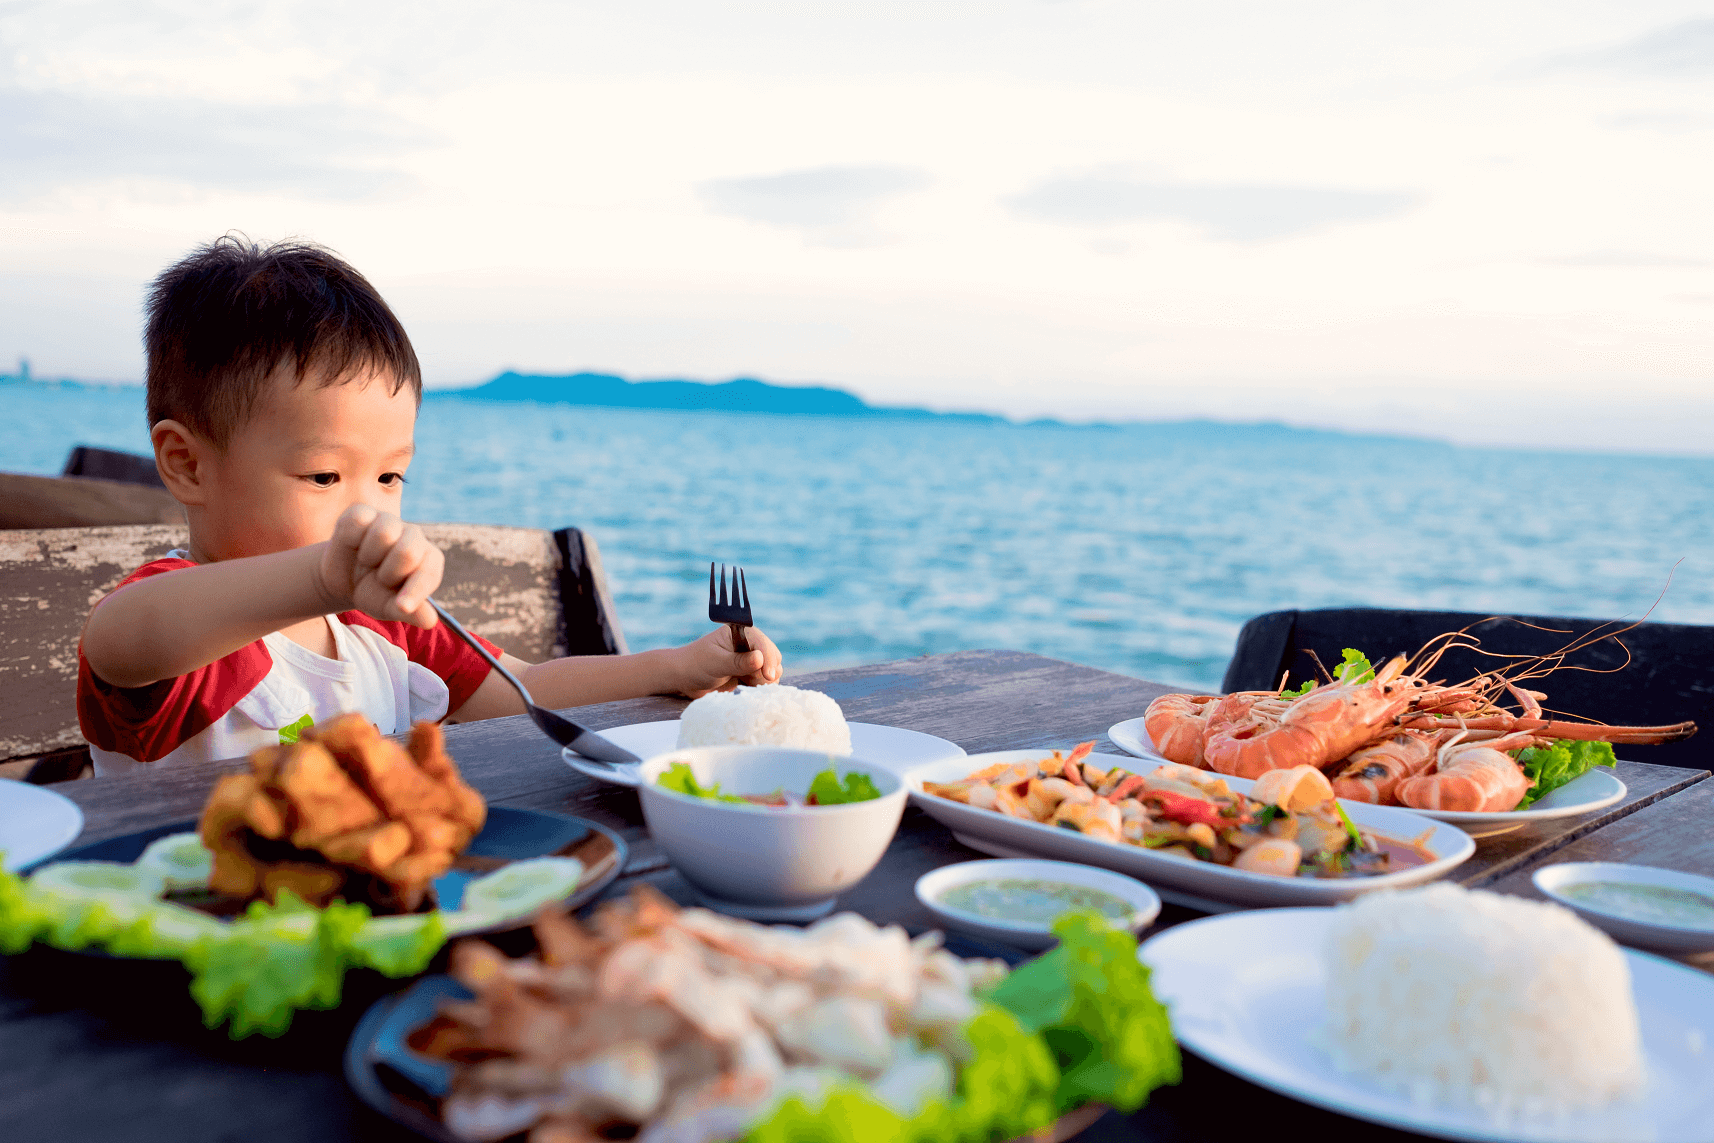 dine-by-the-beach-at-georges-at-the-cove-family-friendly-things-to-do-in-pasir-ris.jpg